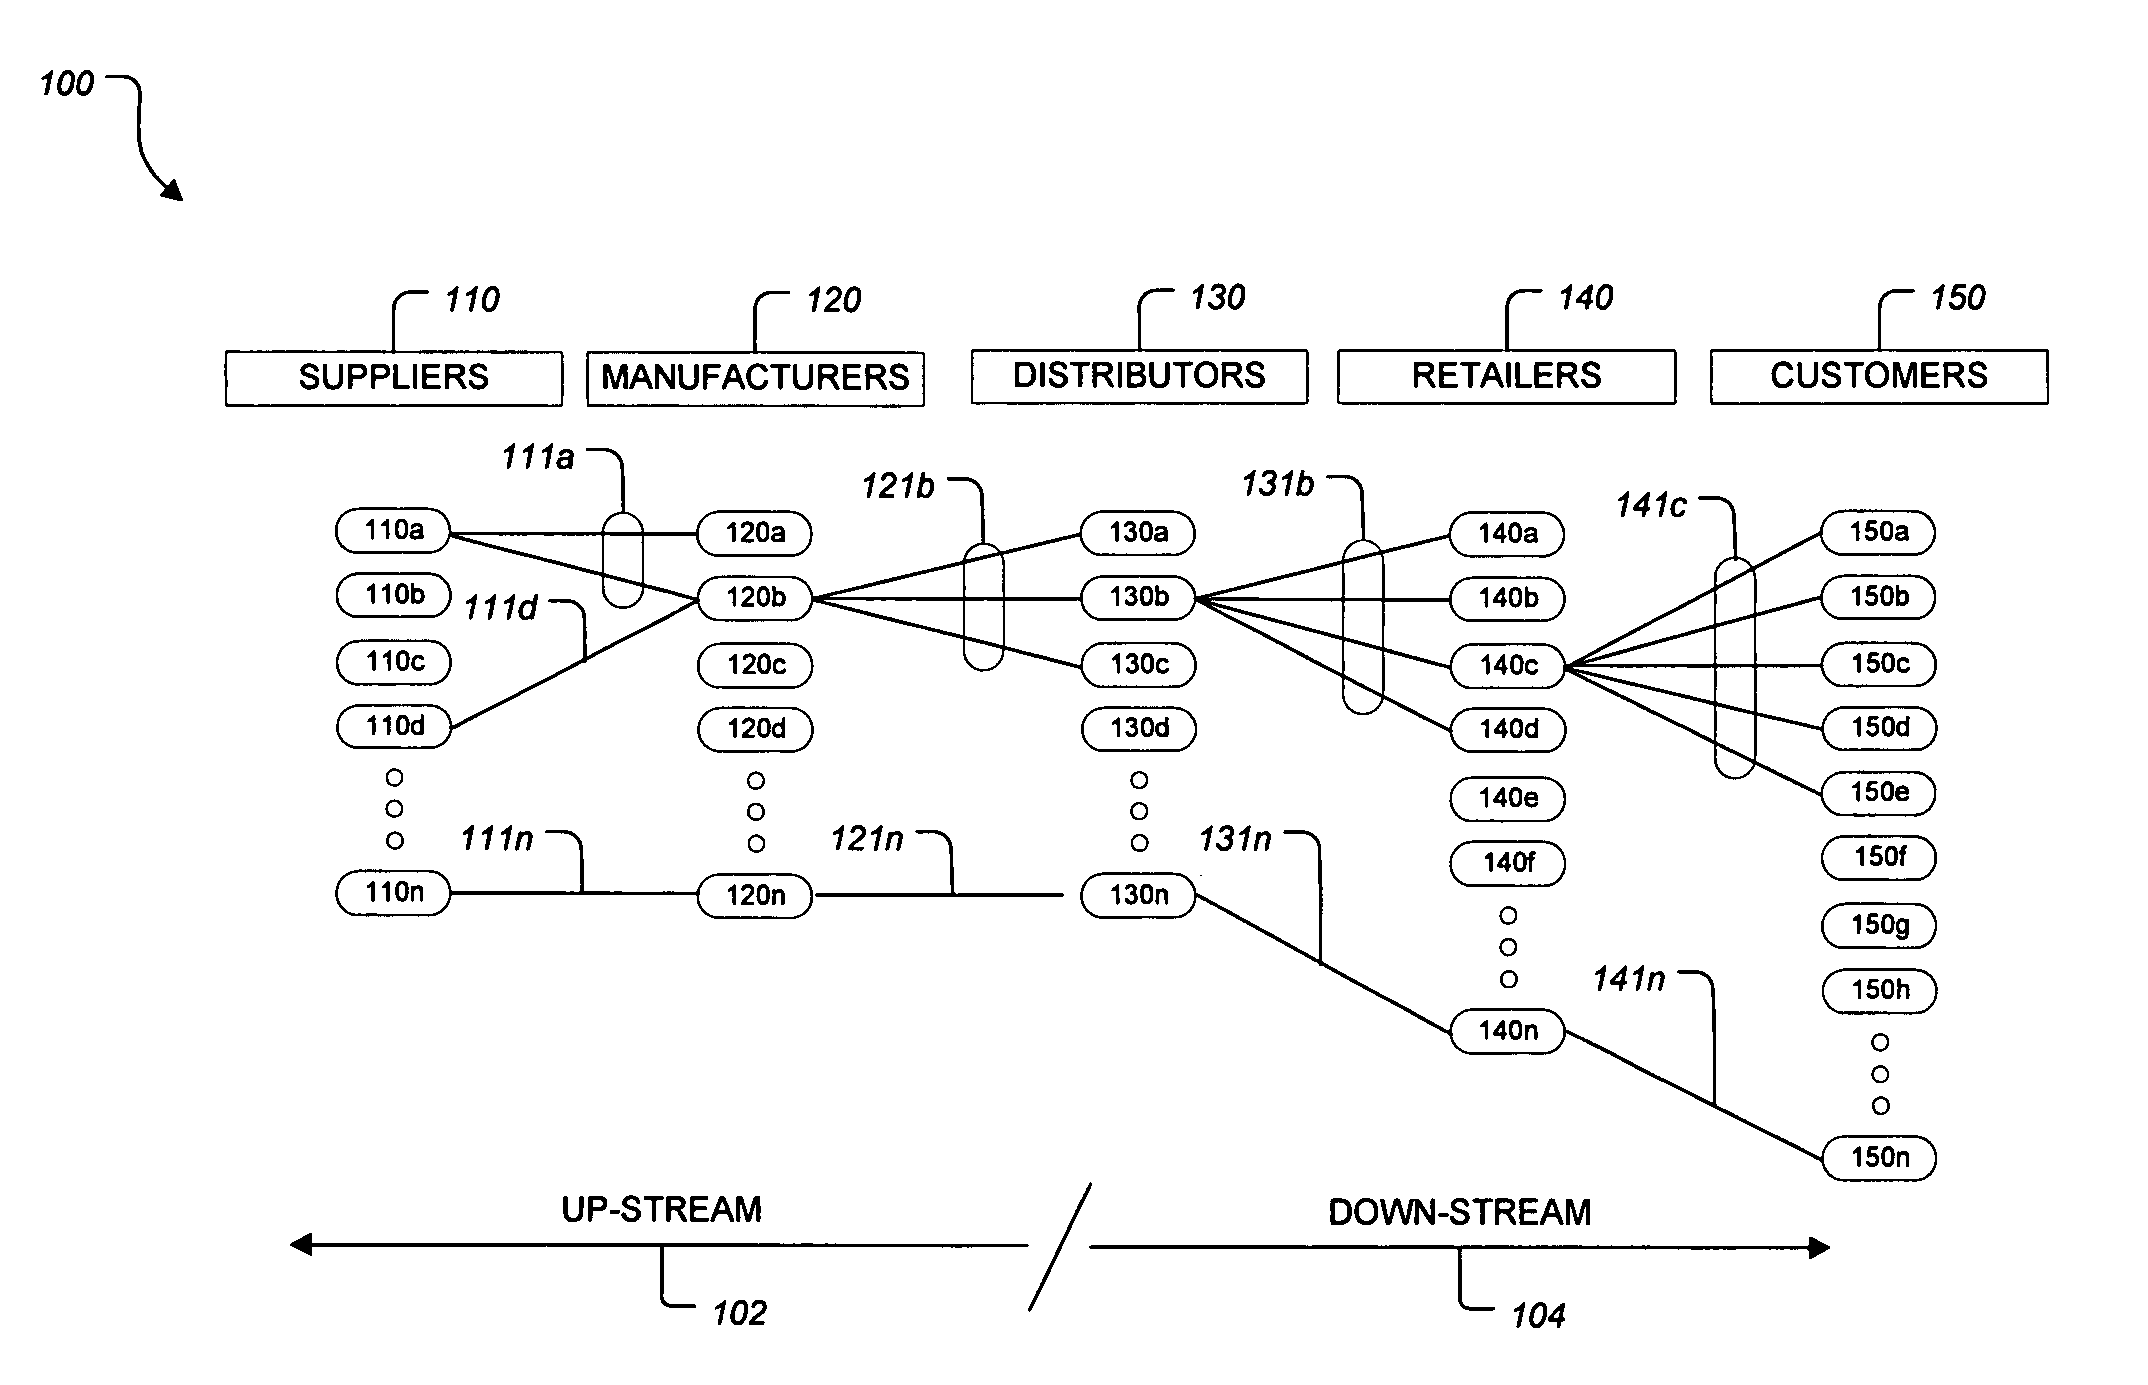 System and method for network visualization and plan review